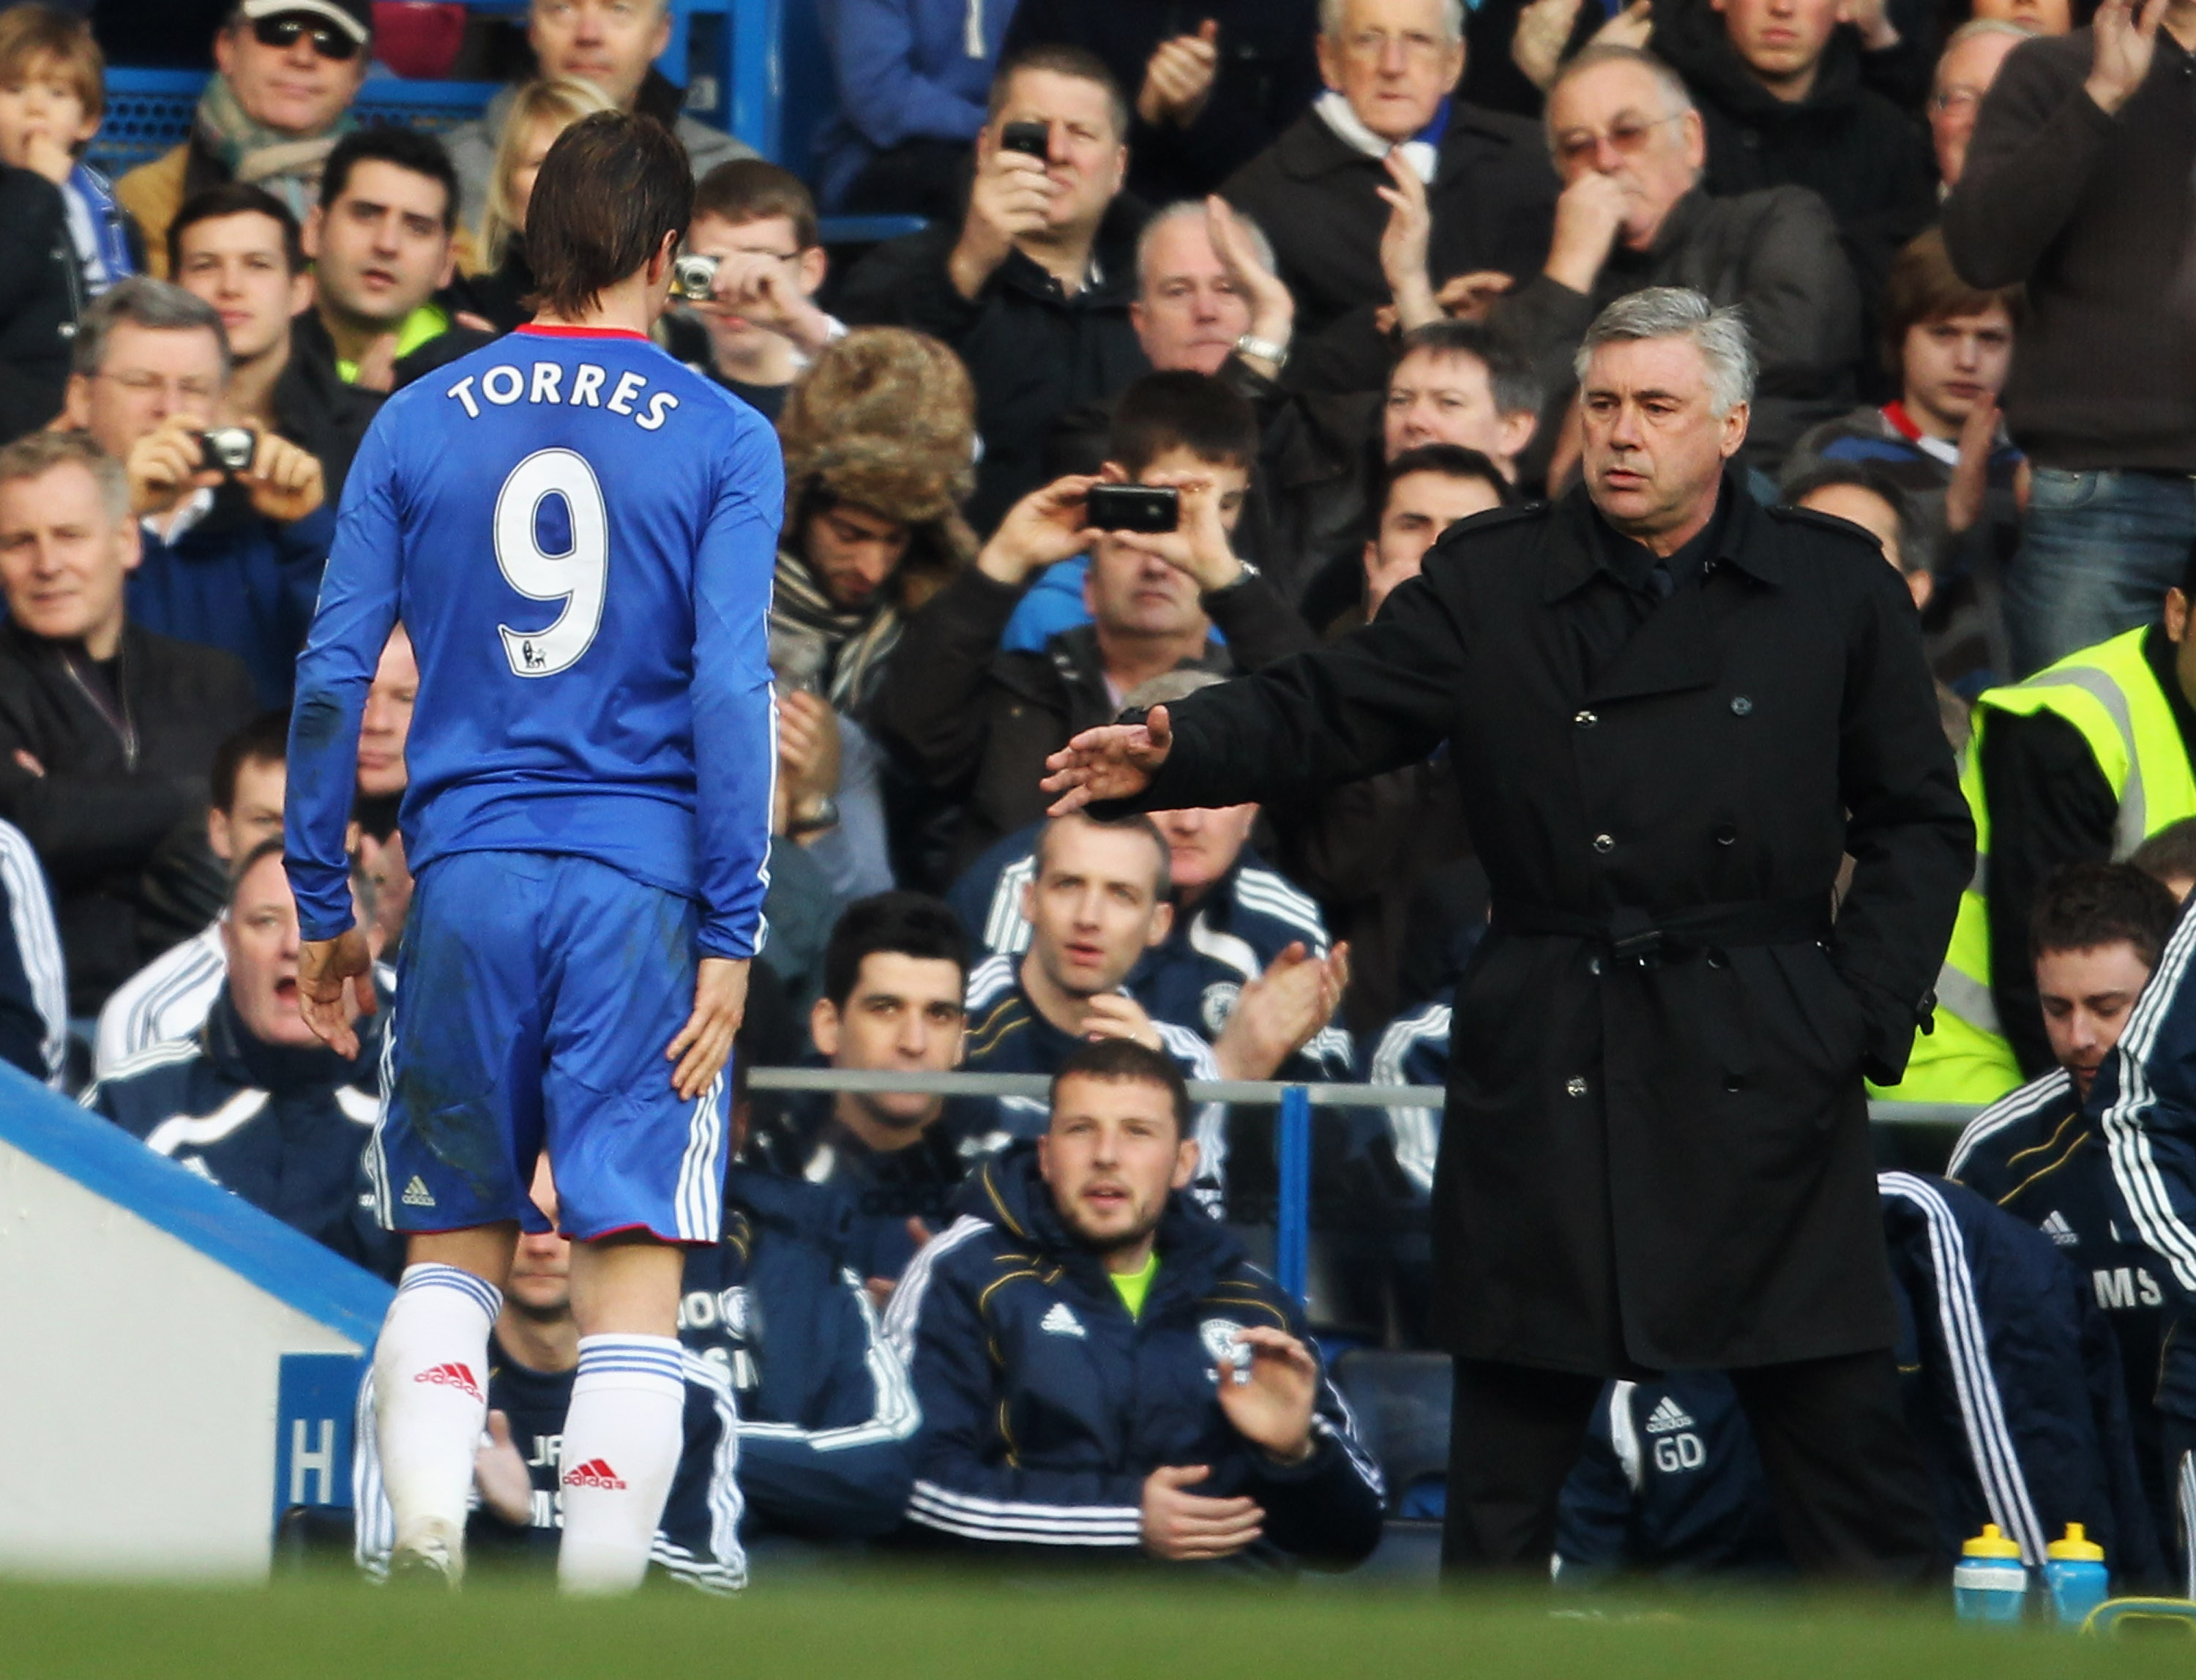 LONDON, ENGLAND - MARCH 20:  Fernando Torres of Chelsea shakes hands with manager Carlo Ancelotti as he is substituted during the Barclays Premier League match between Chelsea and Manchester City at Stamford Bridge on March 20, 2011 in London, England.  (